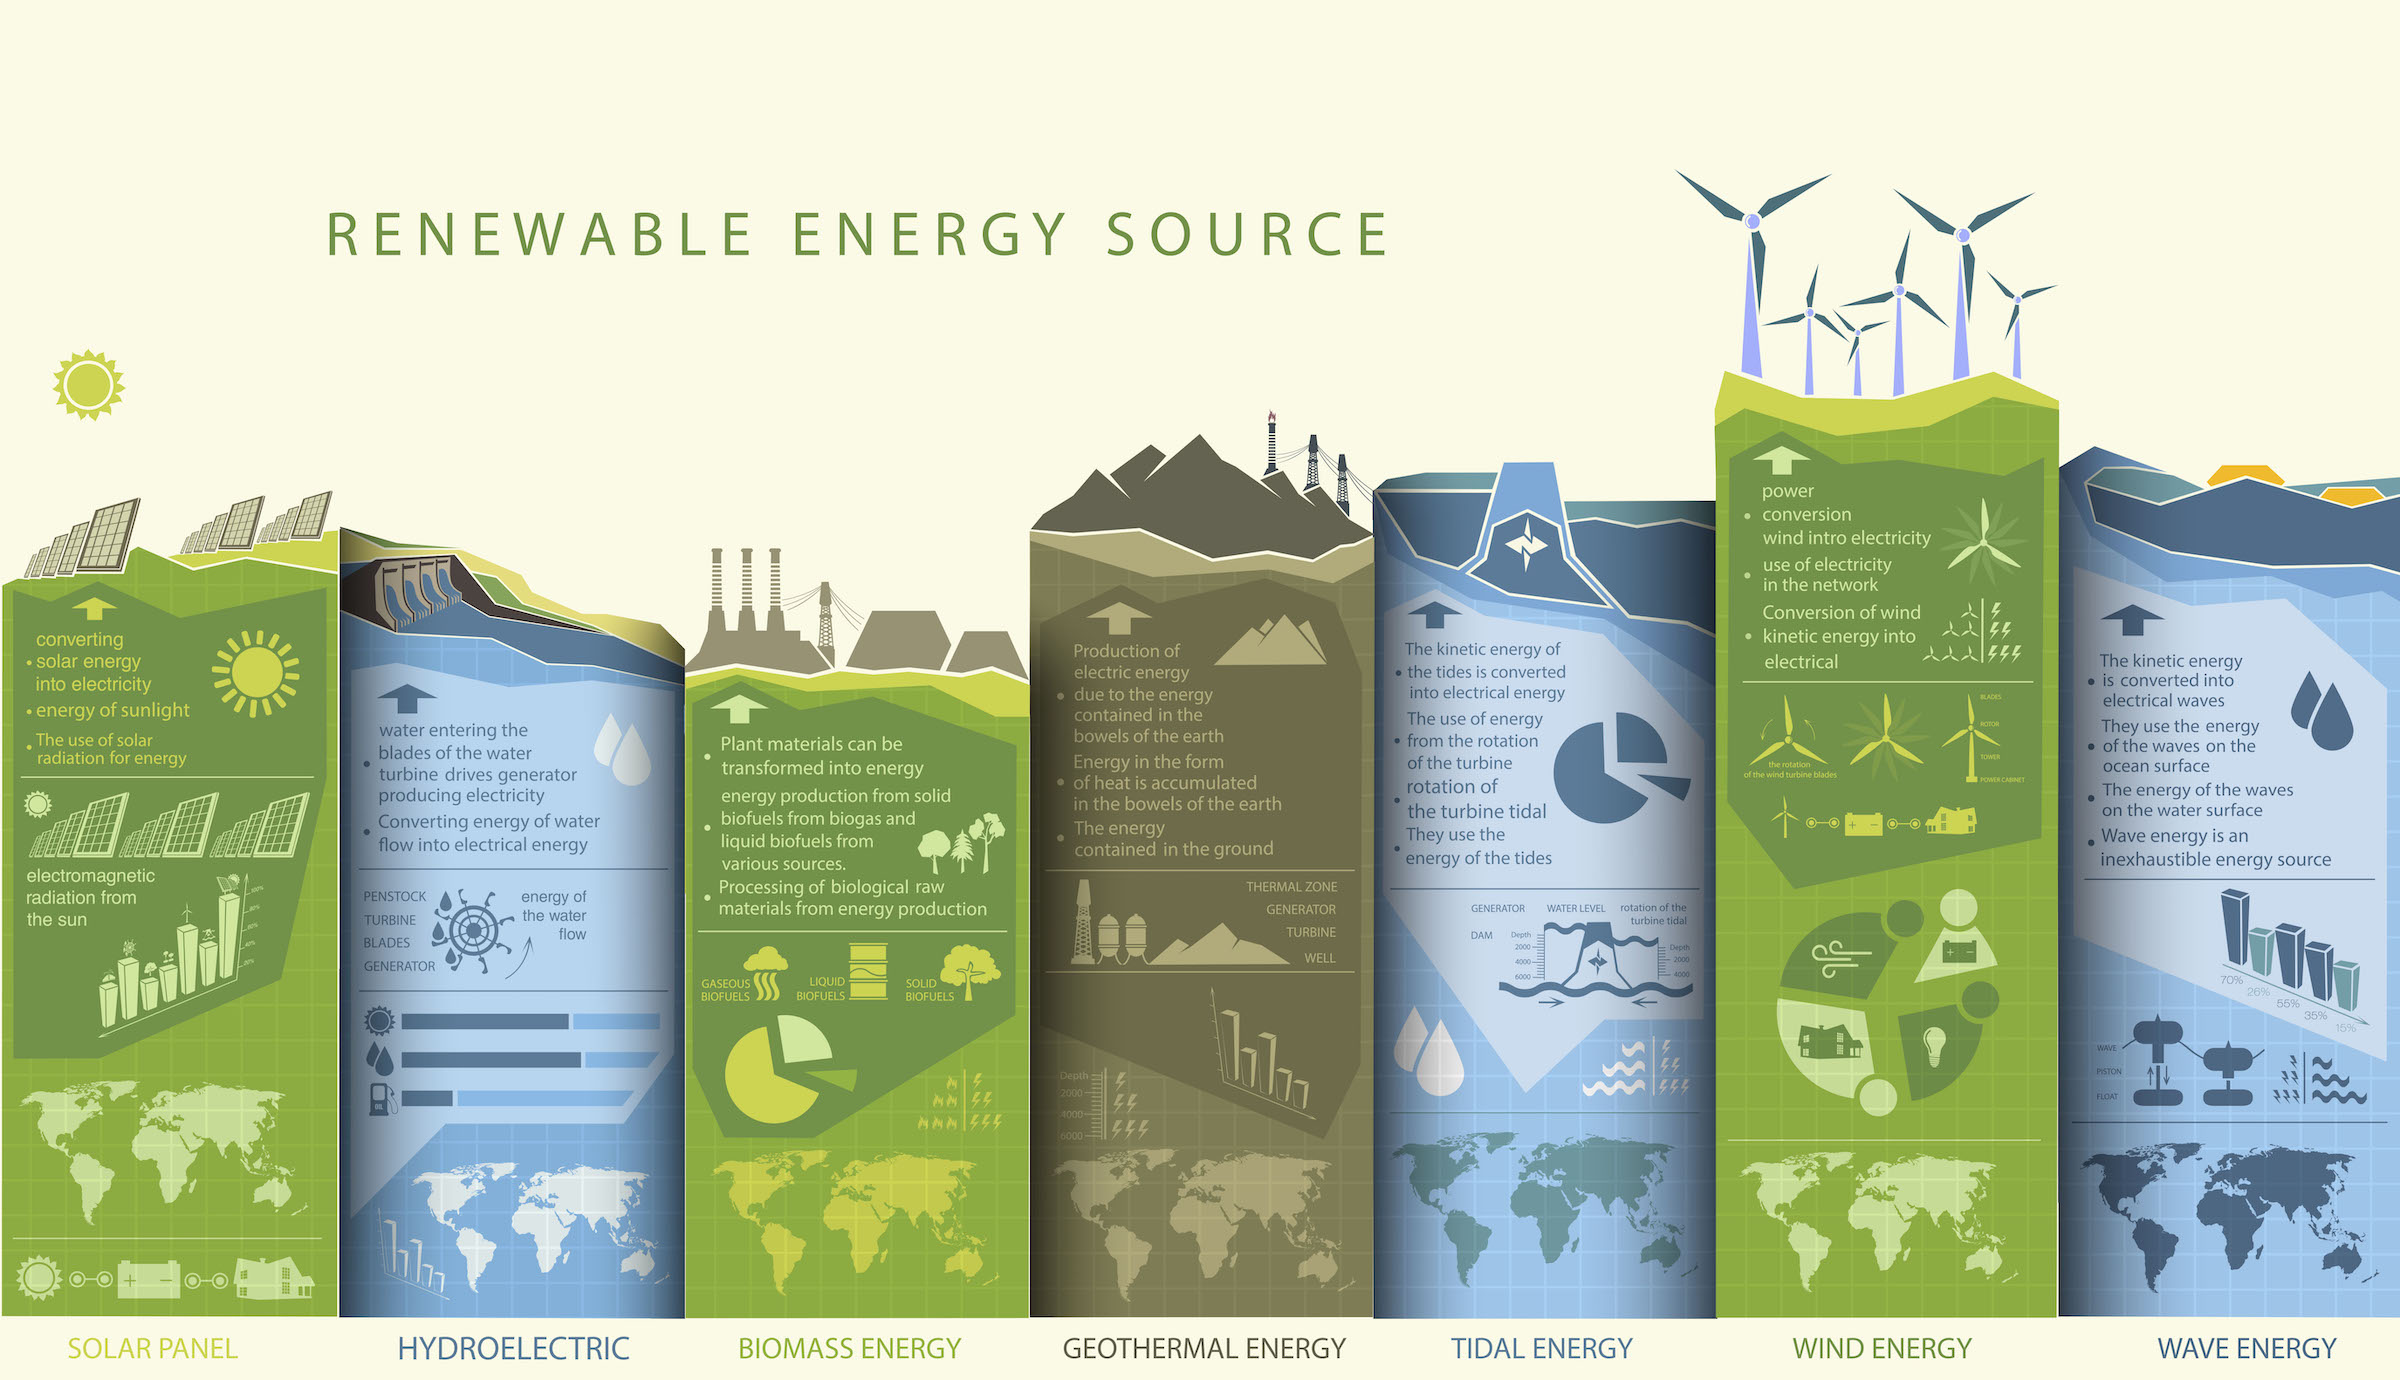 An infographic showing the different forms of renewable energy which may contribute to Canada’s clean energy generation.